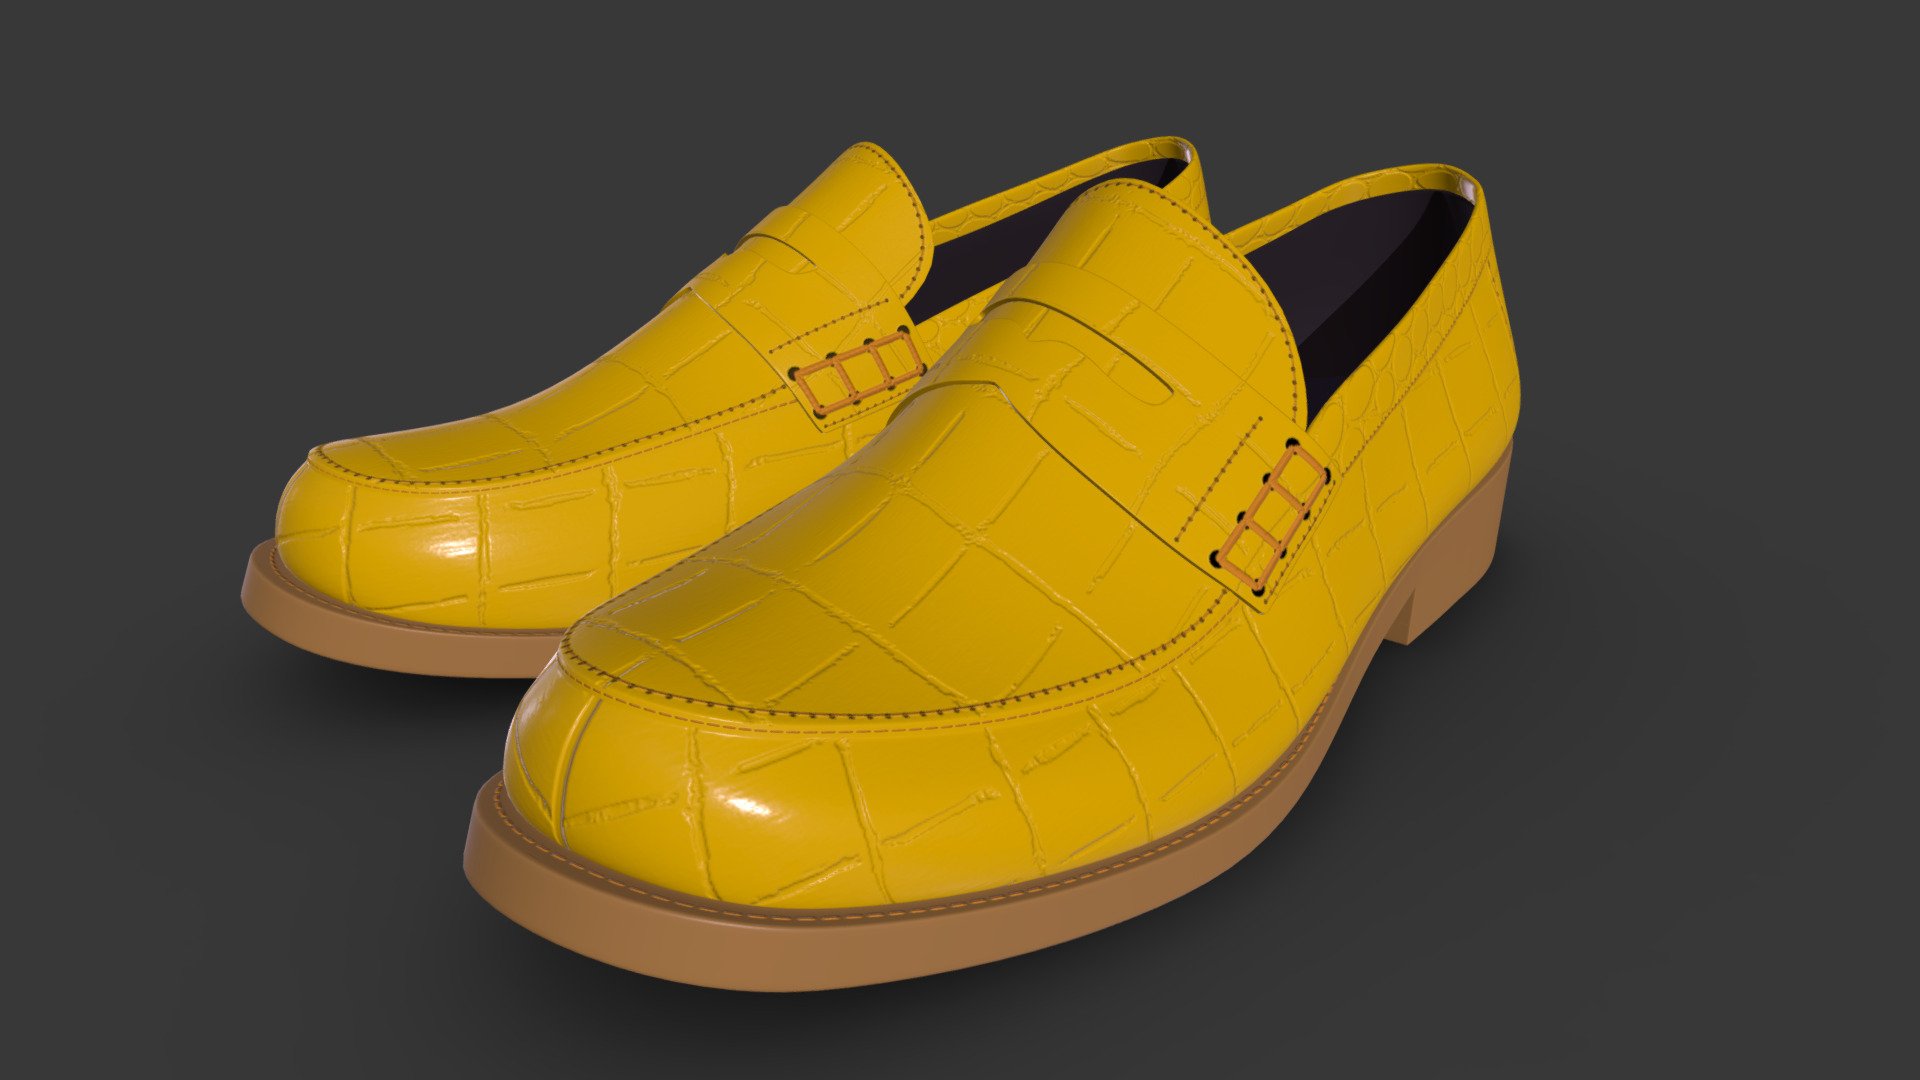 There is one funky song from USSR about Yellow Shoes. Maybe this song about this leather loafers shoes, made from crocodile skin. 

Also I added 4K textures to the additional files 3d model